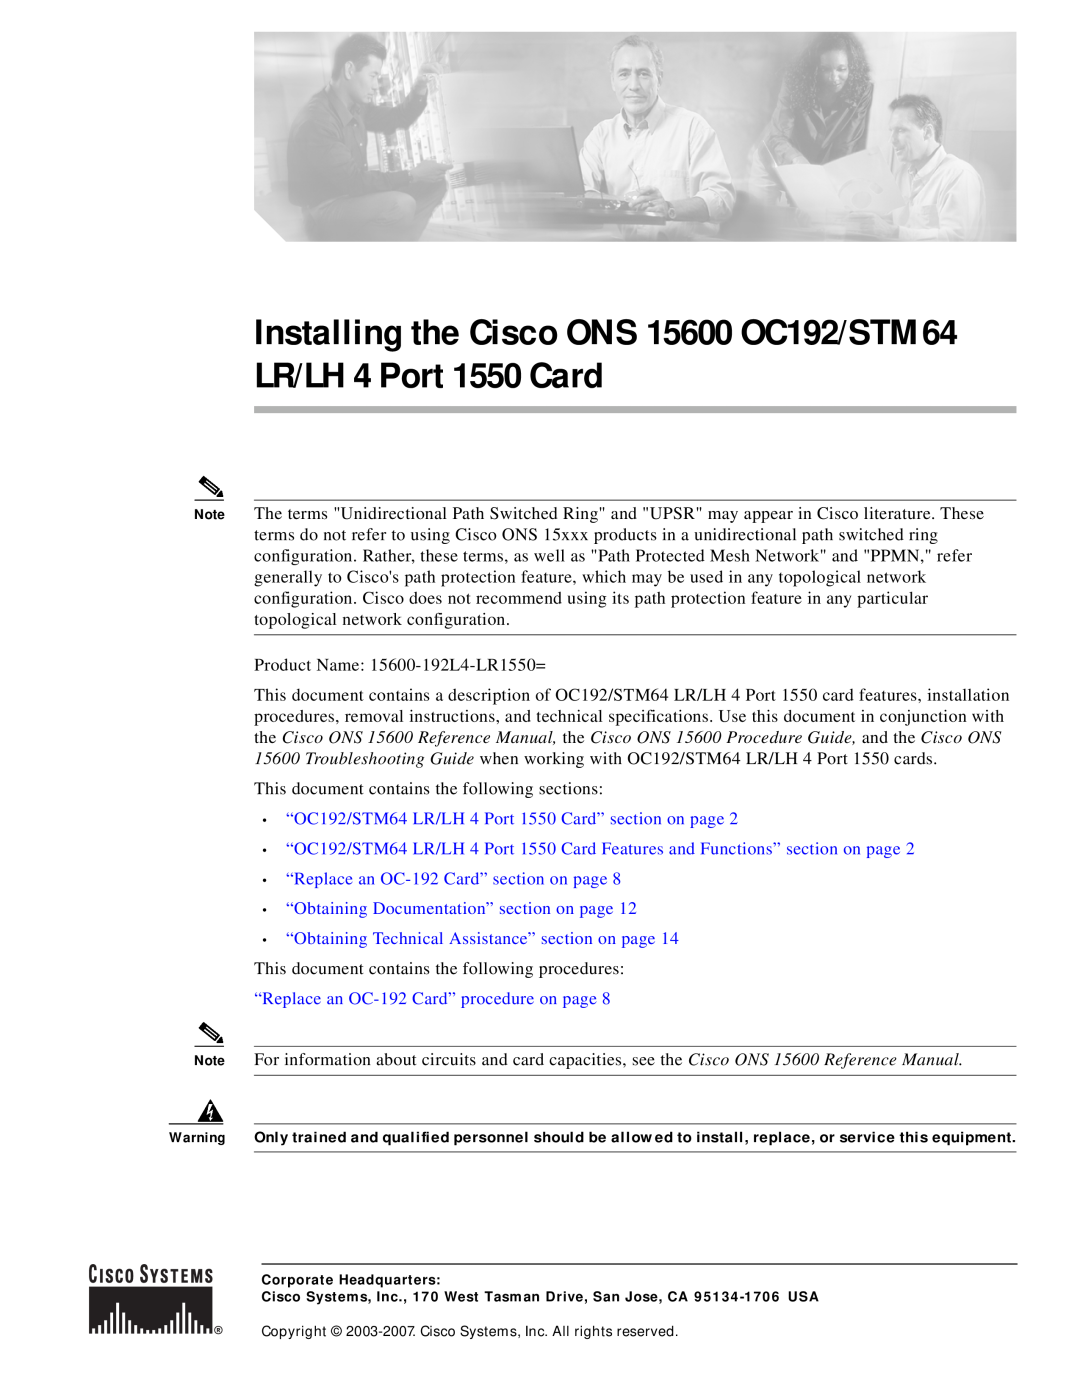 Cisco Systems technical specifications “OC192/STM64 LR/LH 4 Port 1550 Card” section on page 